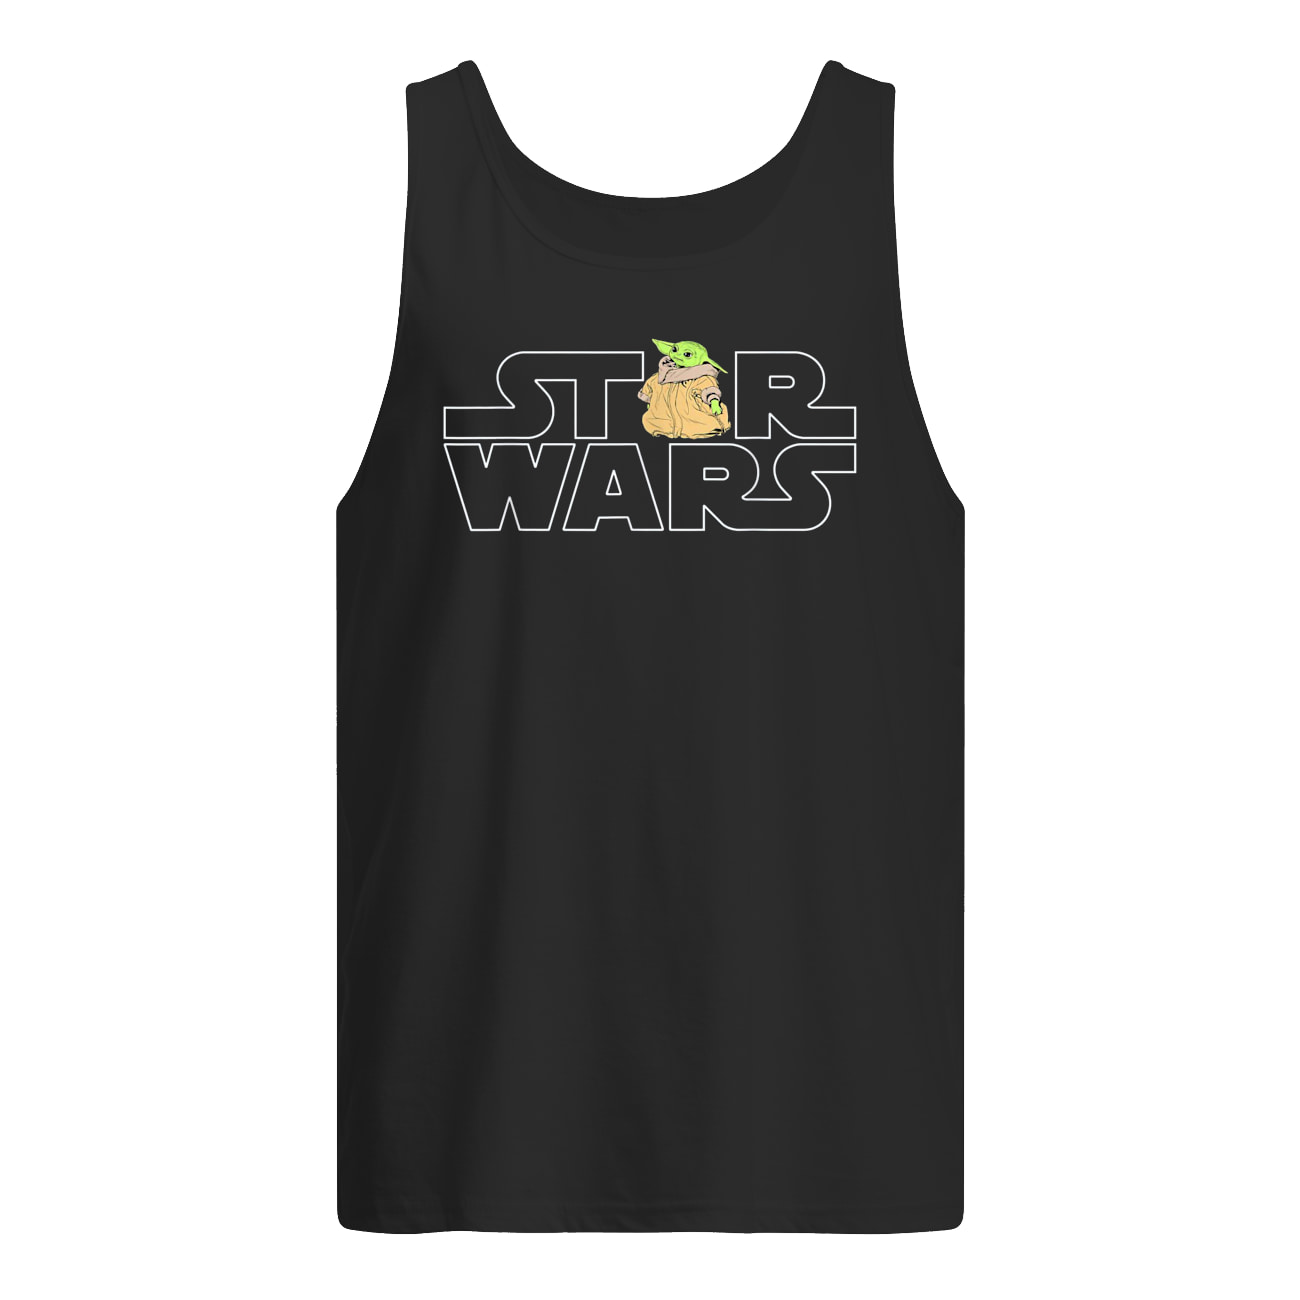 Star wars logo and the child from the mandalorian tank top